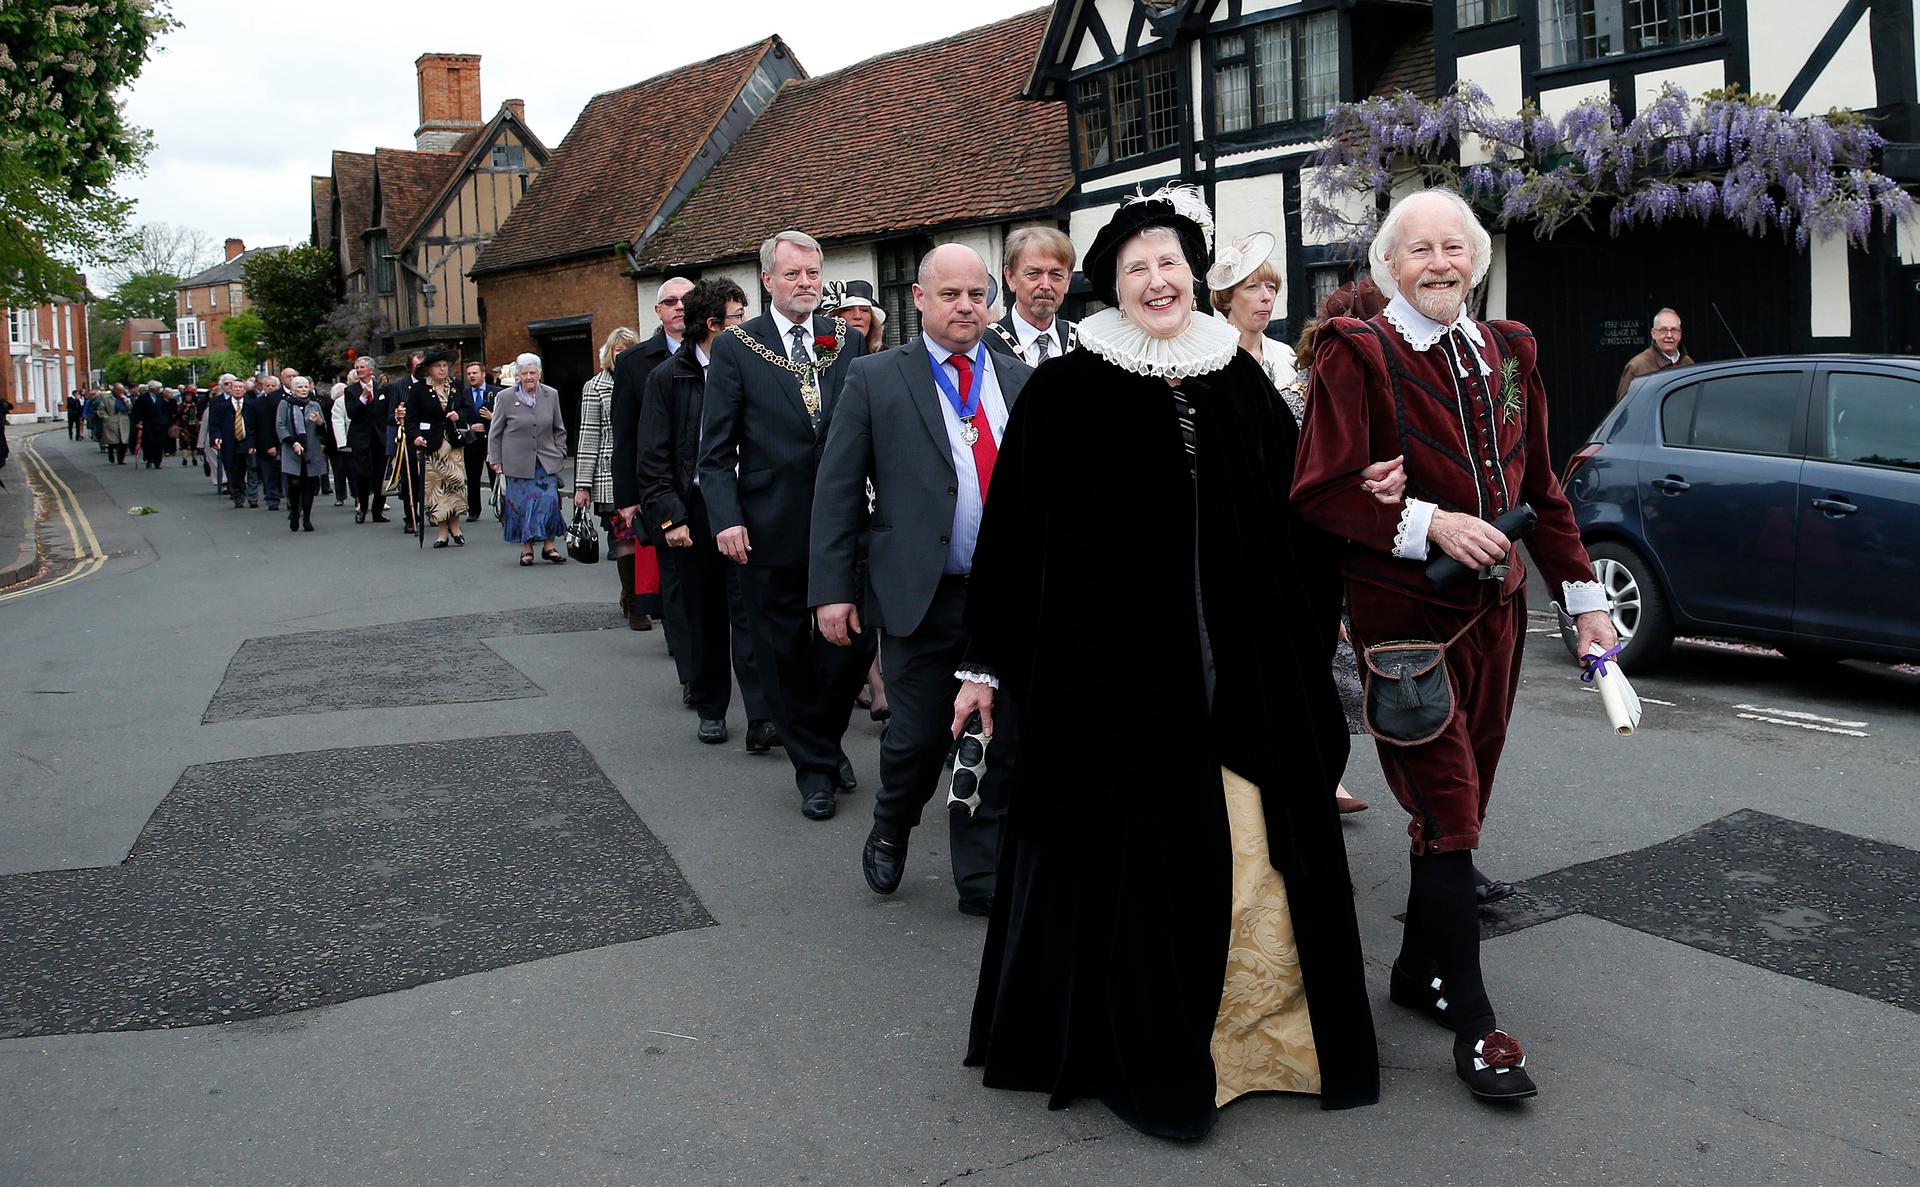 Dressed as William Shakespeare and his wife Anne Hathaway, John and his wife Monica Evans join a procession to Holy Trinity Church where Shakespeare was buried, marking the 450th anniversary of his birth in 2014